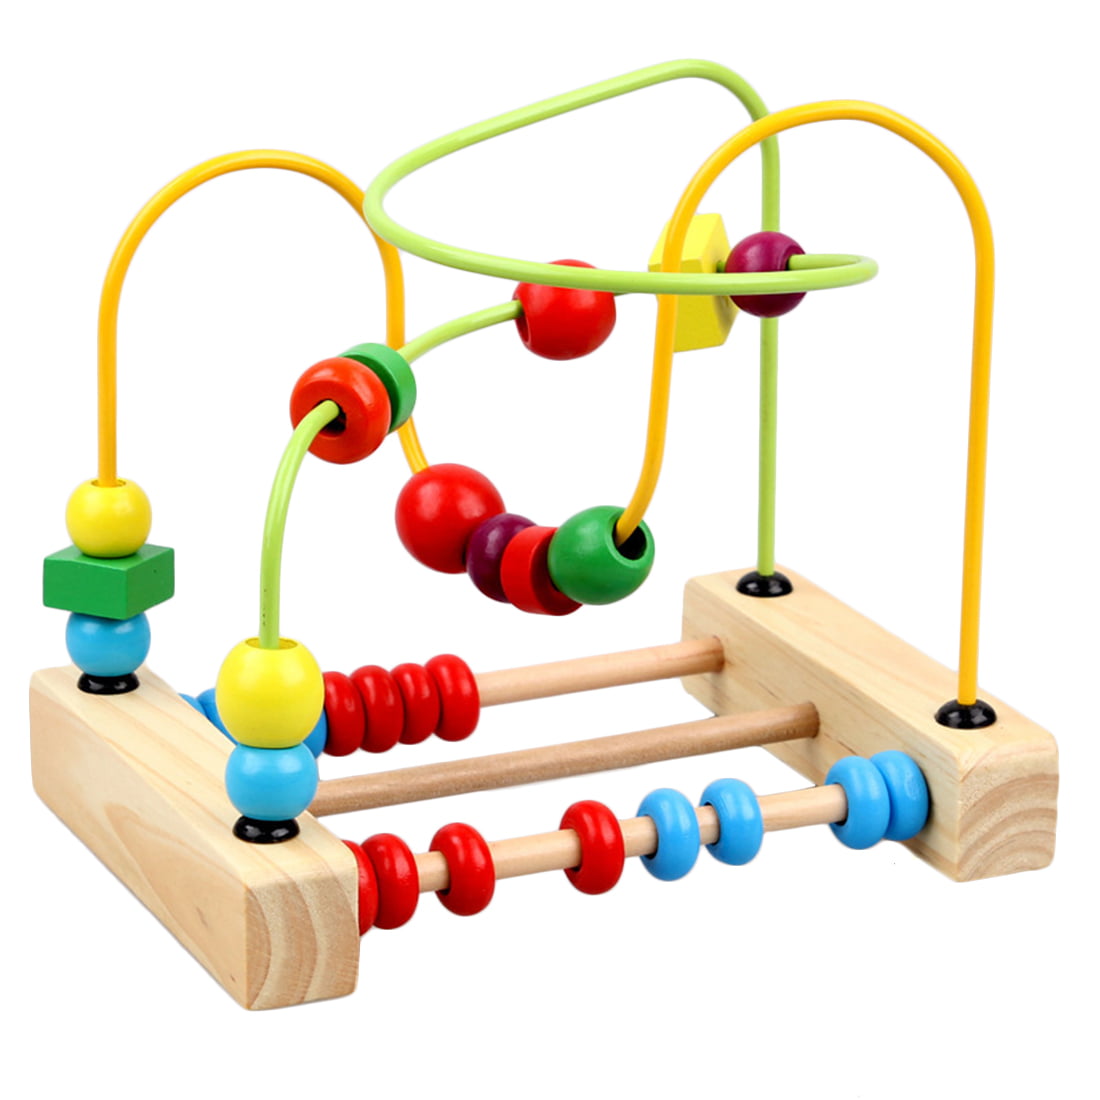 Baby wooden toy Mini around the beads Wire maze Colorful Educational Game S 